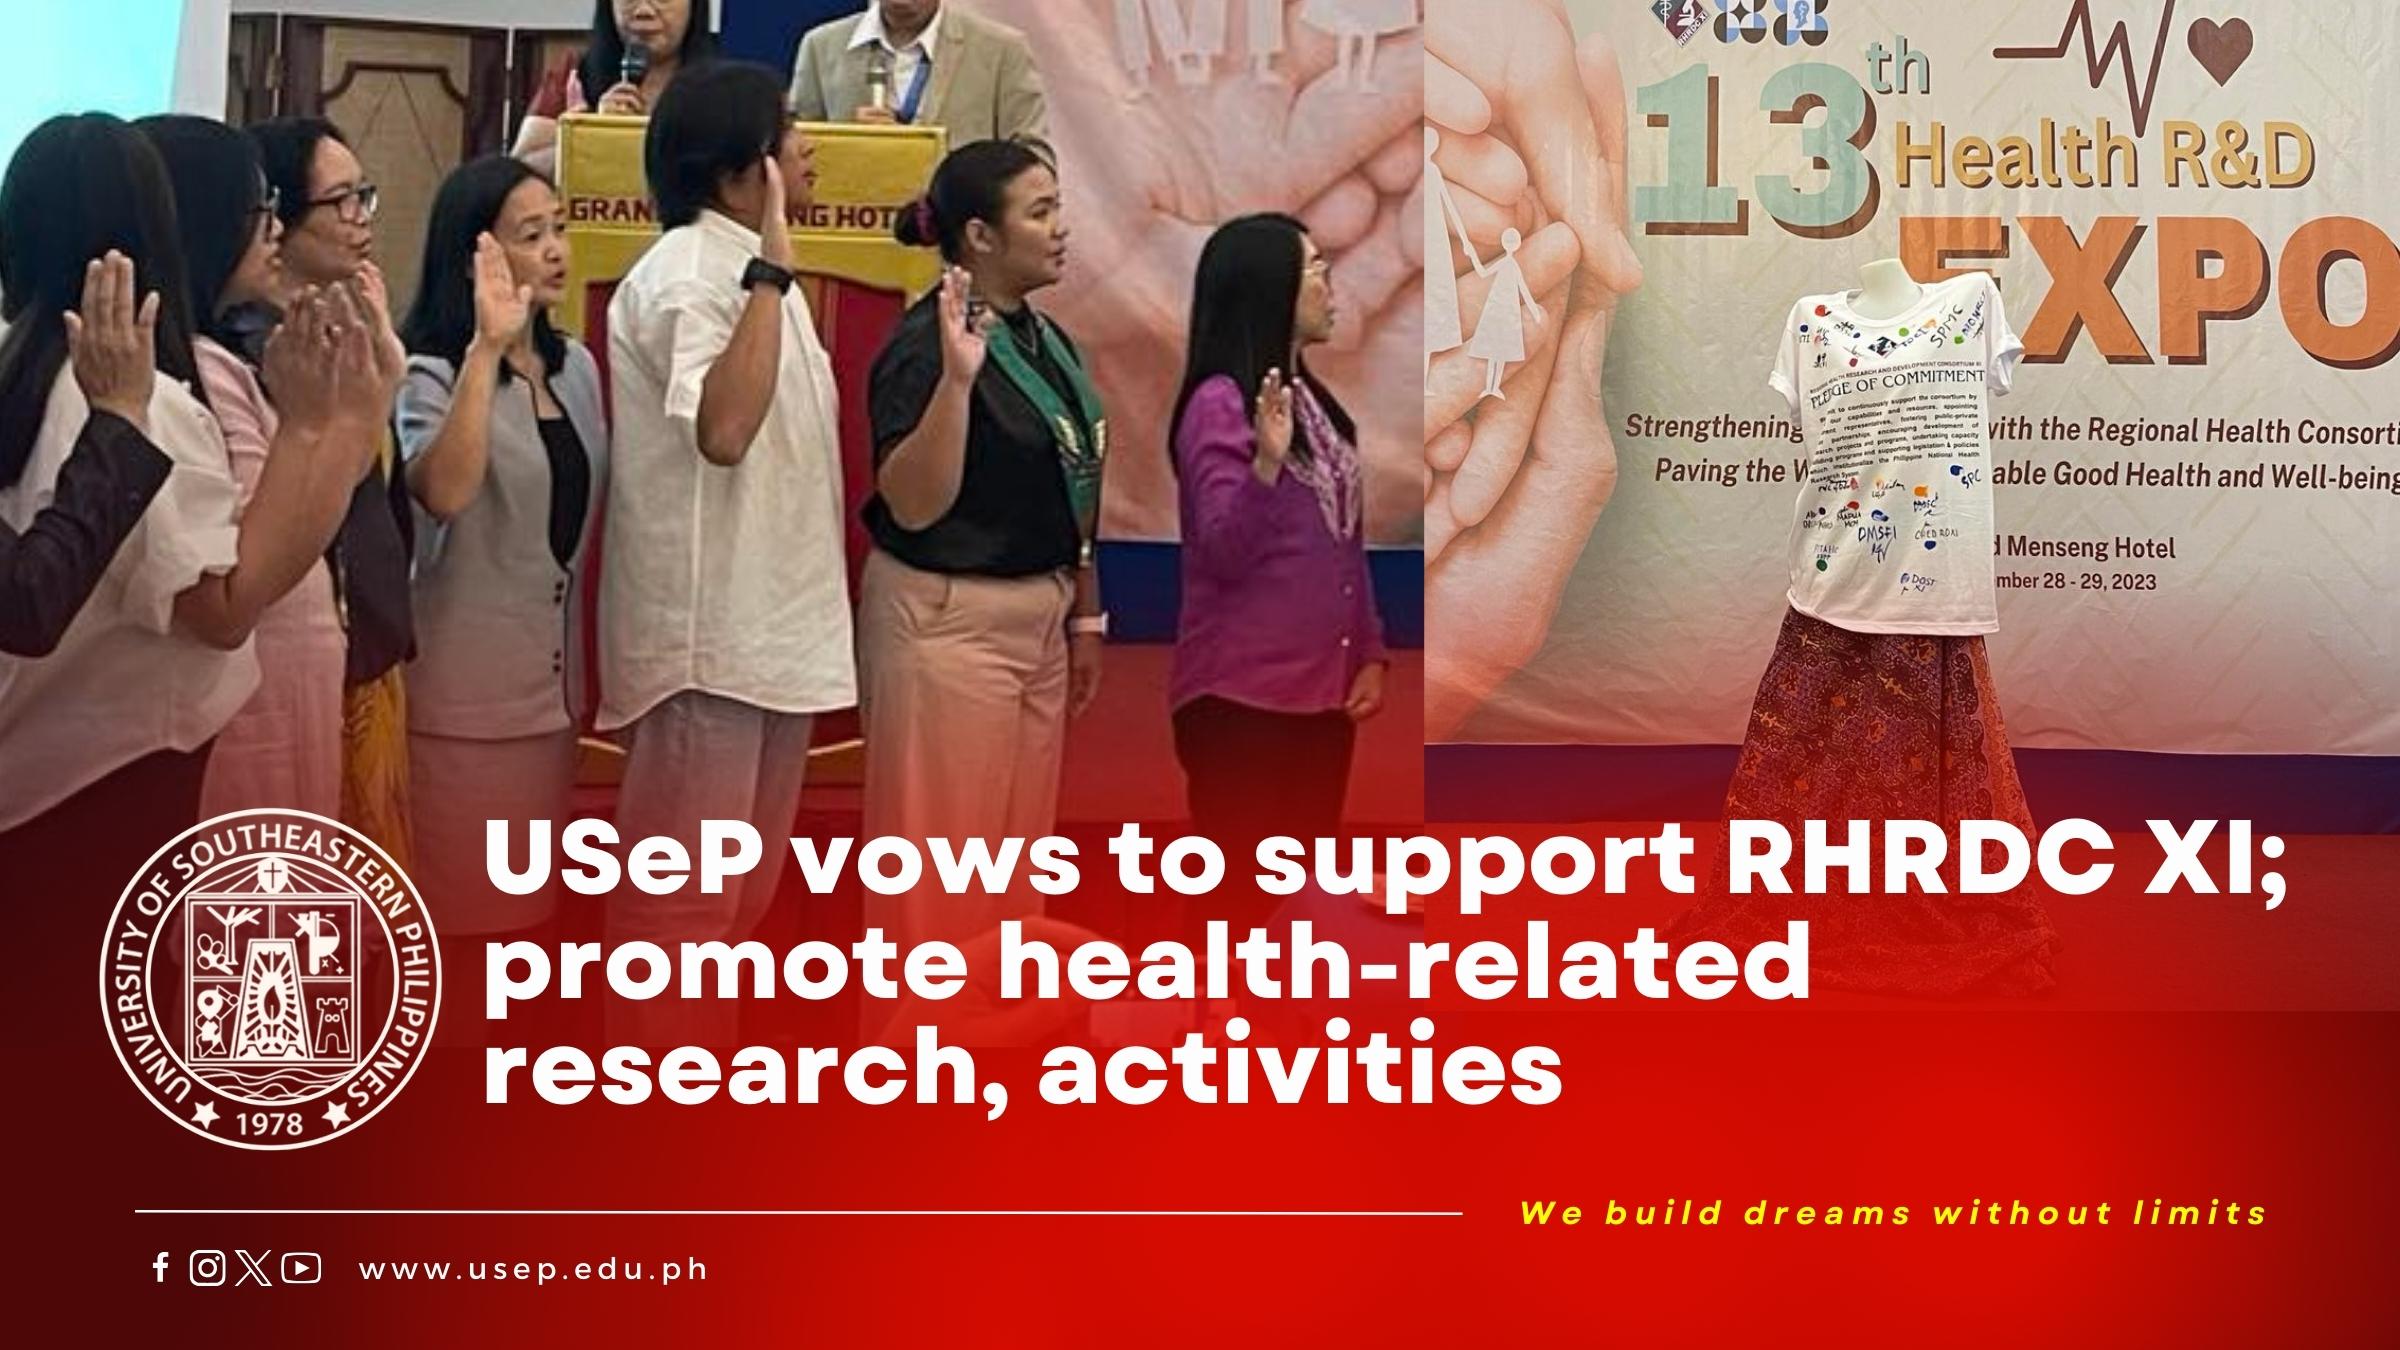 USeP vows to support RHRDC XI; promote health-related research, activities